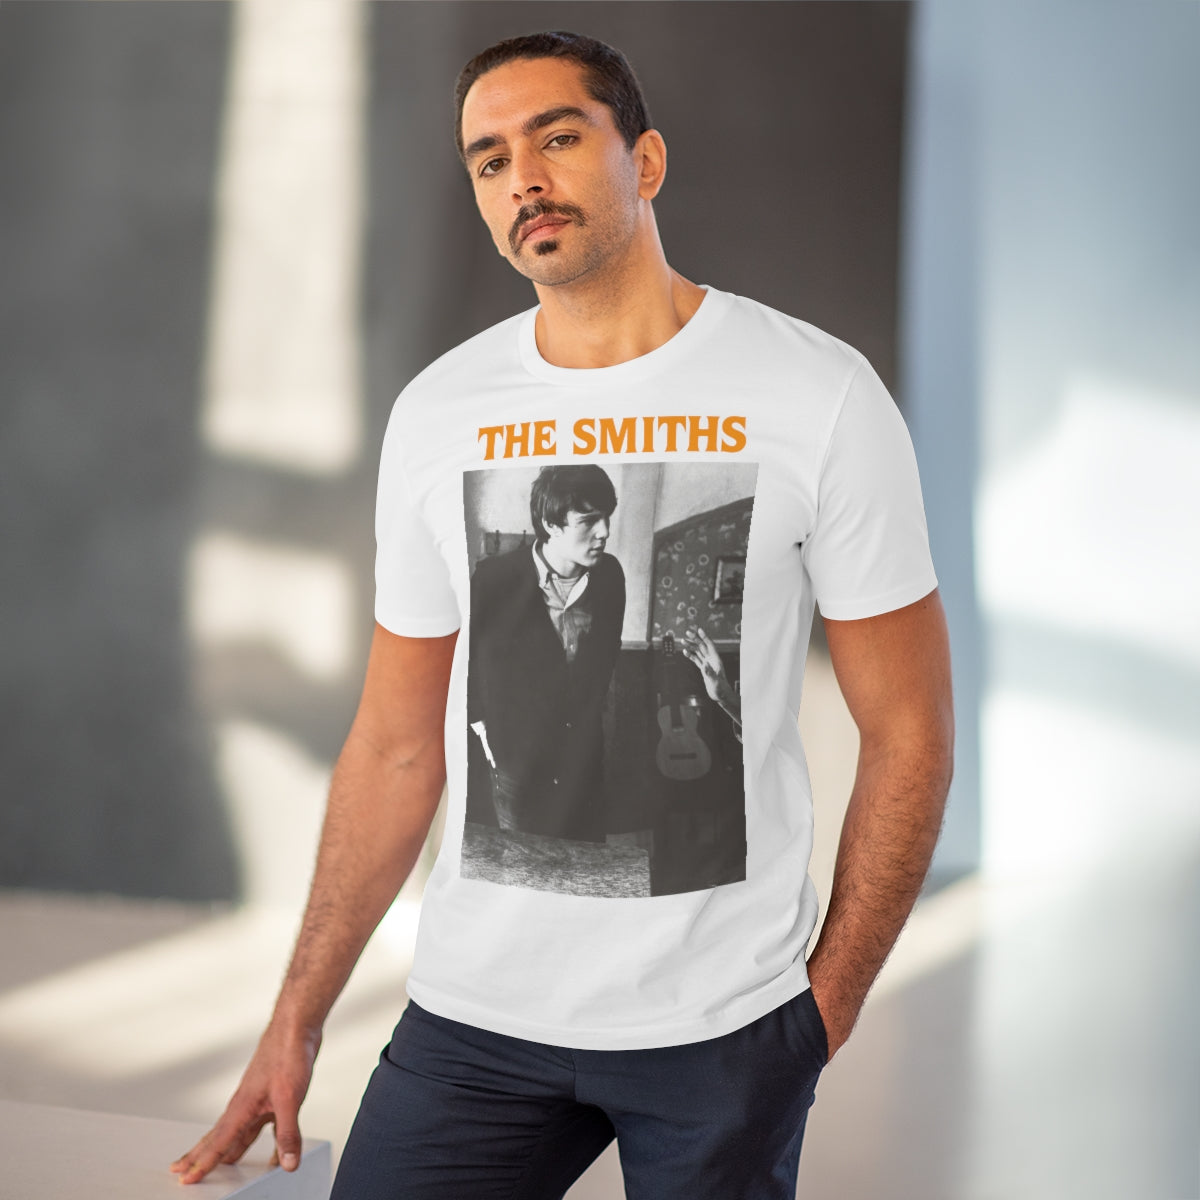 THE SMITHS - STOP ME IF YOU THINK YOU'VE HEARD THIS ONE BEFORE - DUTCH - 1987 - TOP TEXT